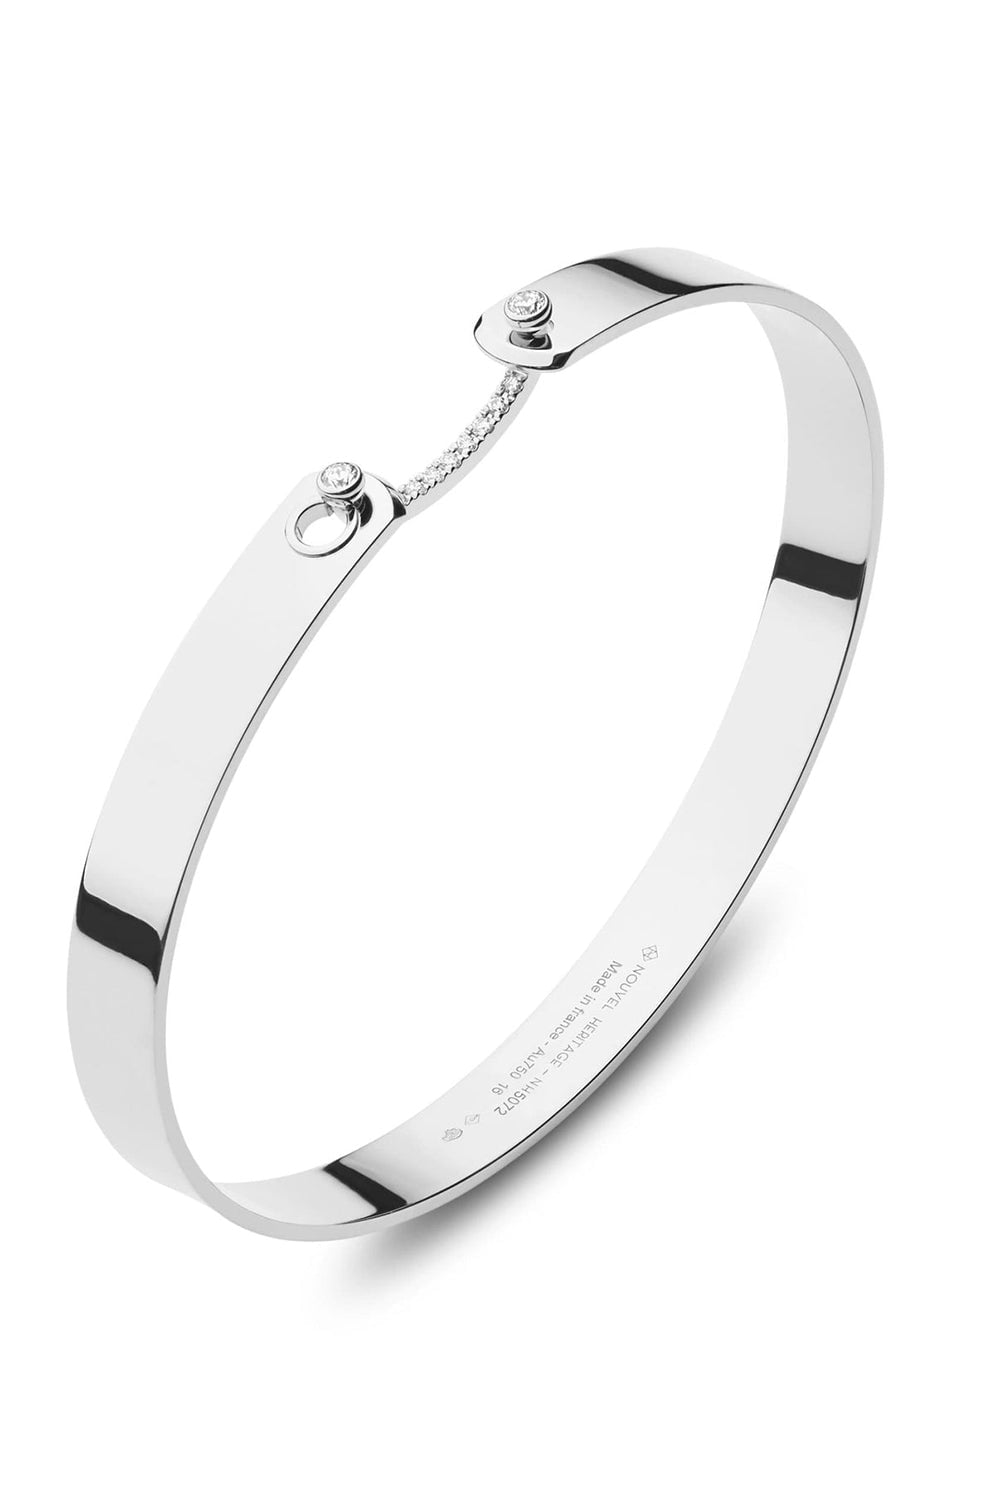 NOUVEL HERITAGE-Business Meeting GM Mood Bangle-WHITE GOLD